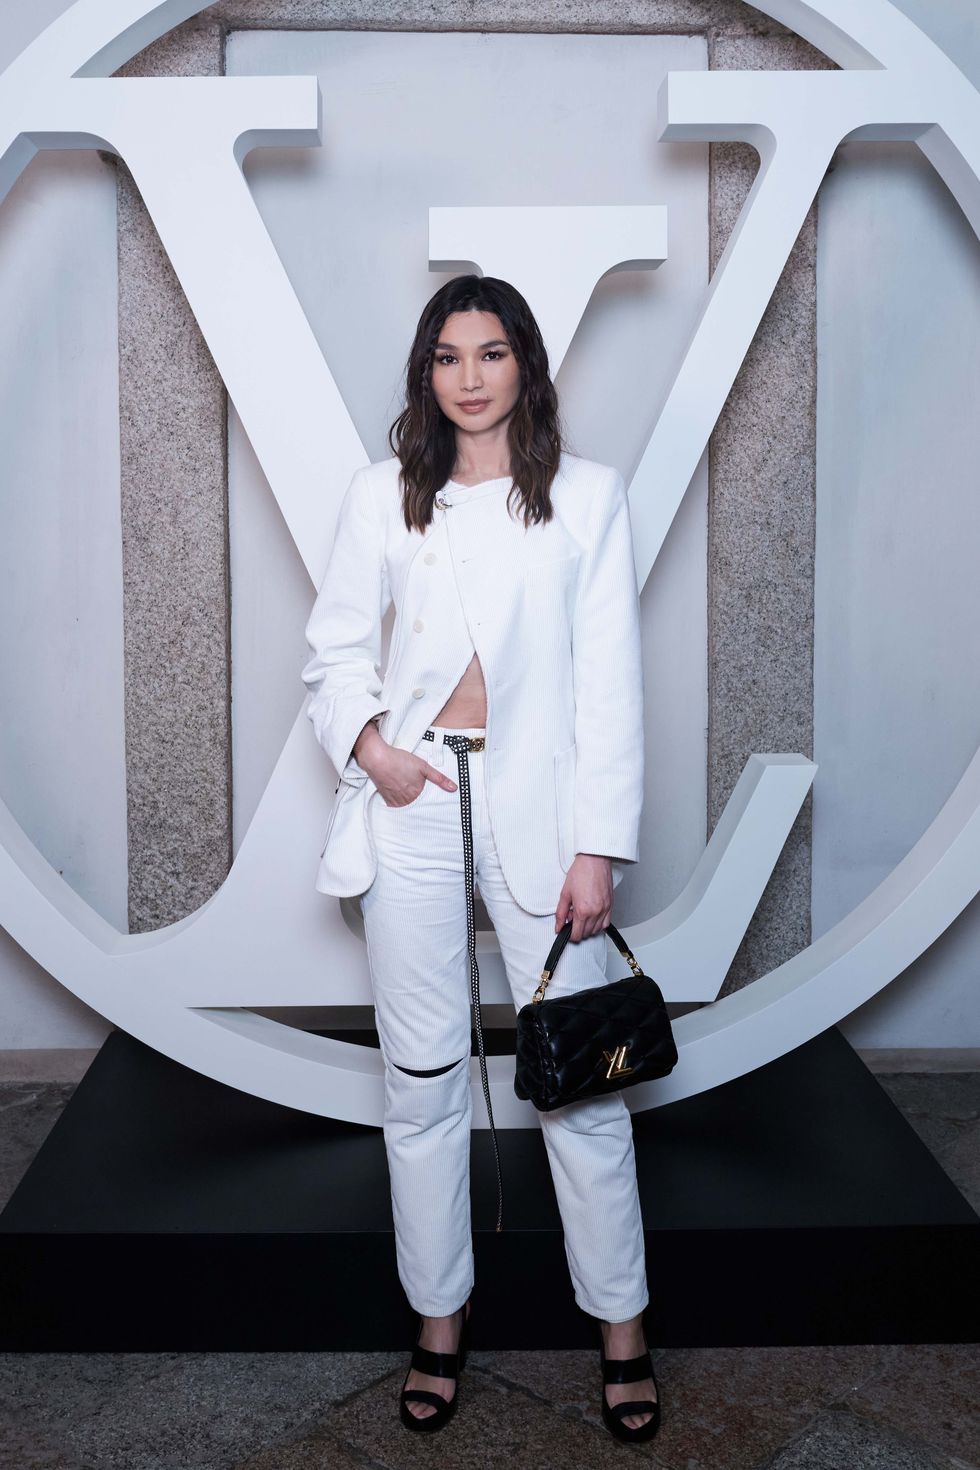 Latest Fashion Brand Updates, Campaigns & Shows  LE MILE Magazine News  Blog - Louis Vuitton Cruise Collection 2024: Isola Bella's Timeless  Elegance Revealed - LE MILE